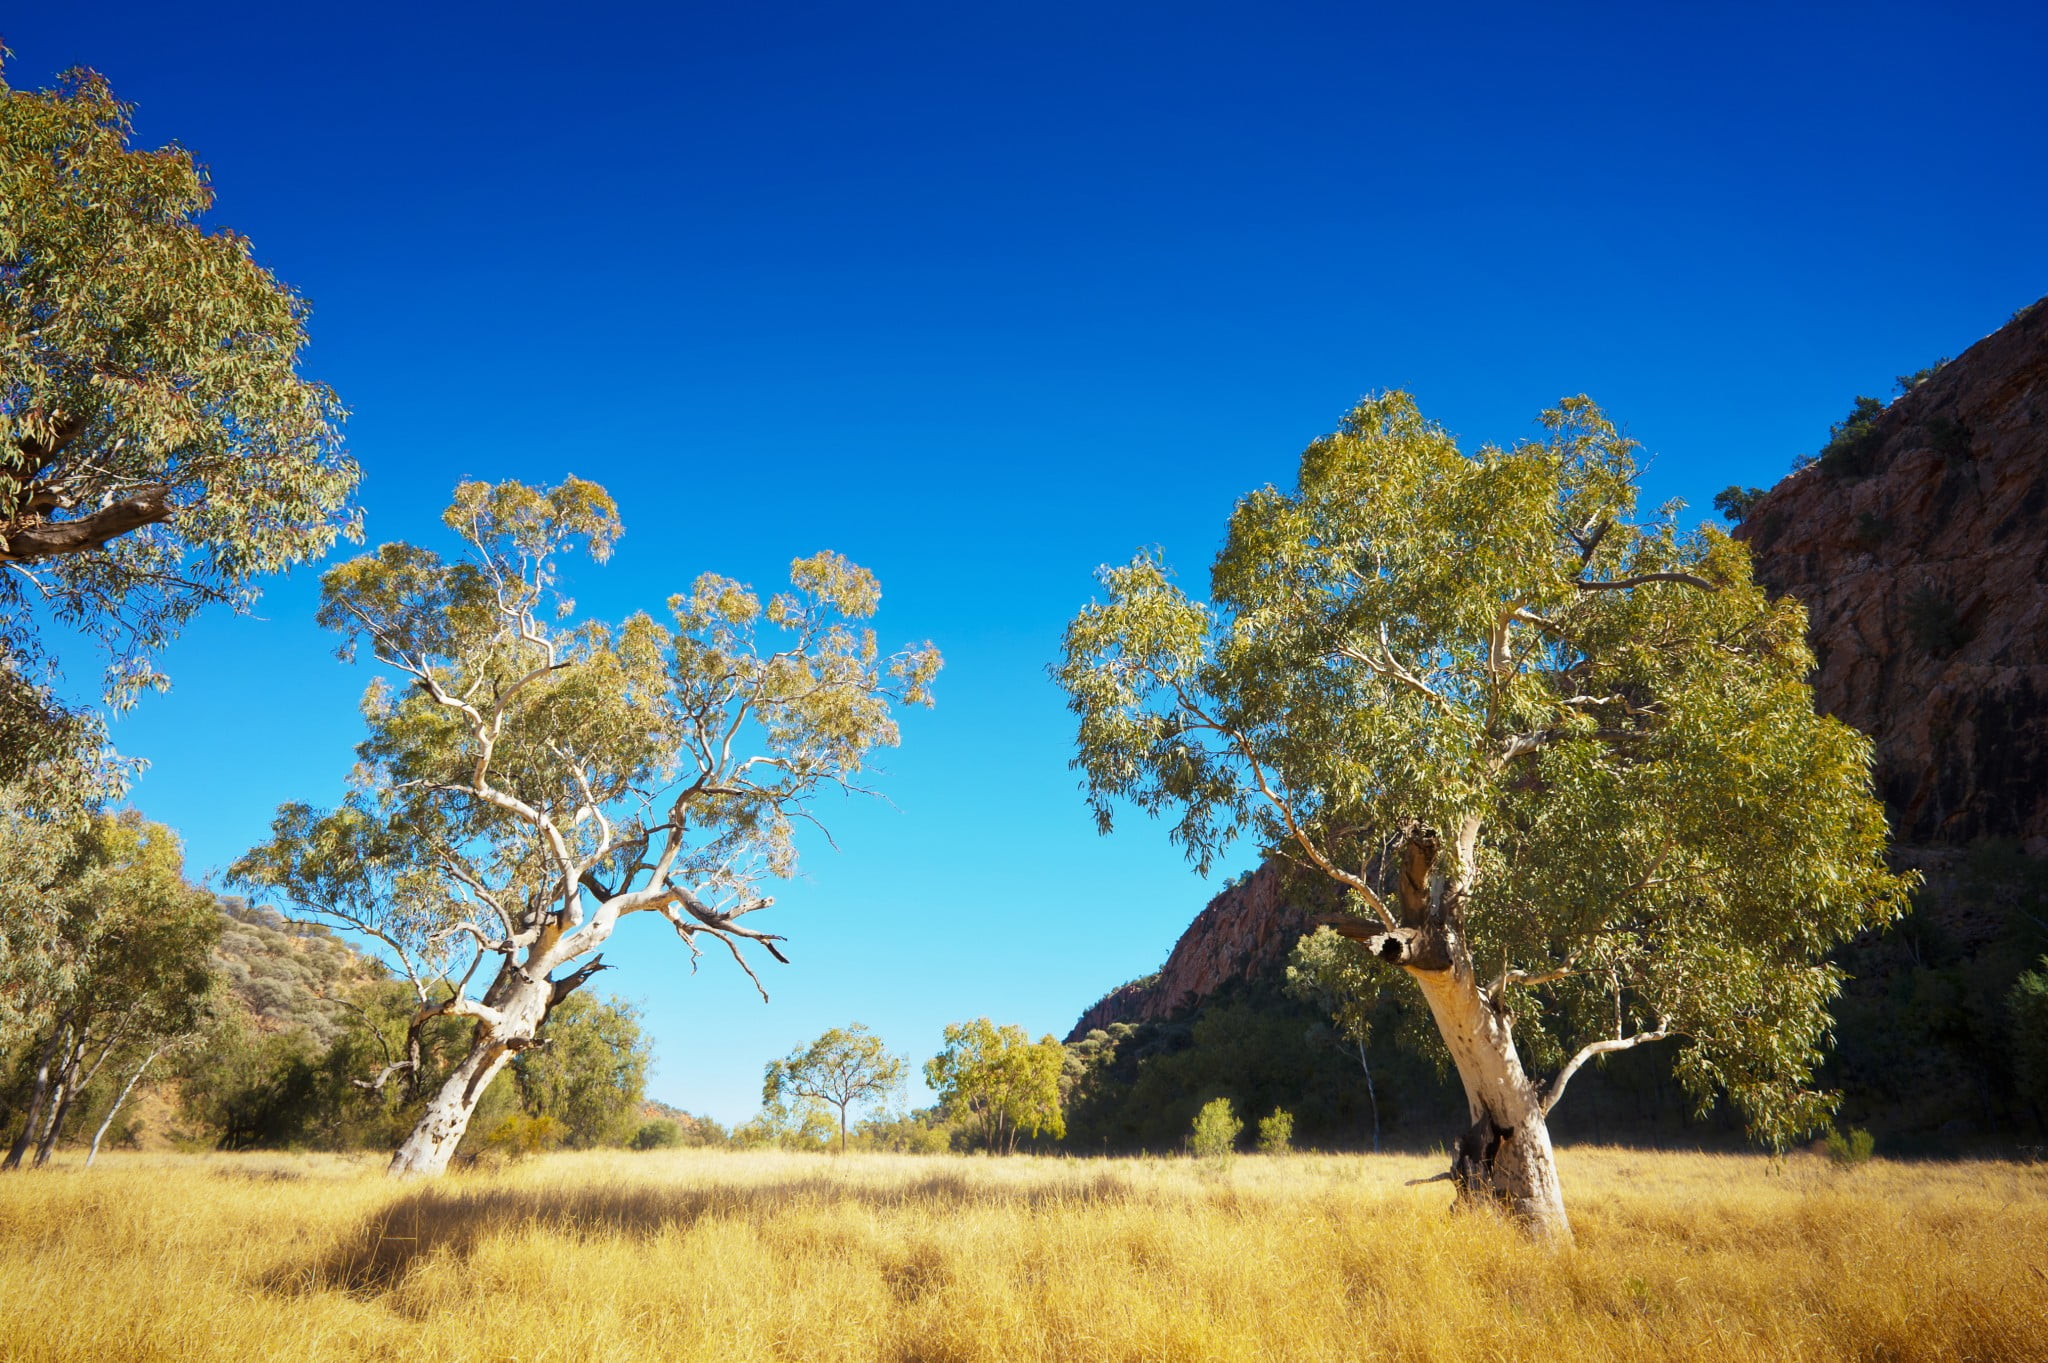 rural pharmacy: pretty rural scene with gum trees and blue sky